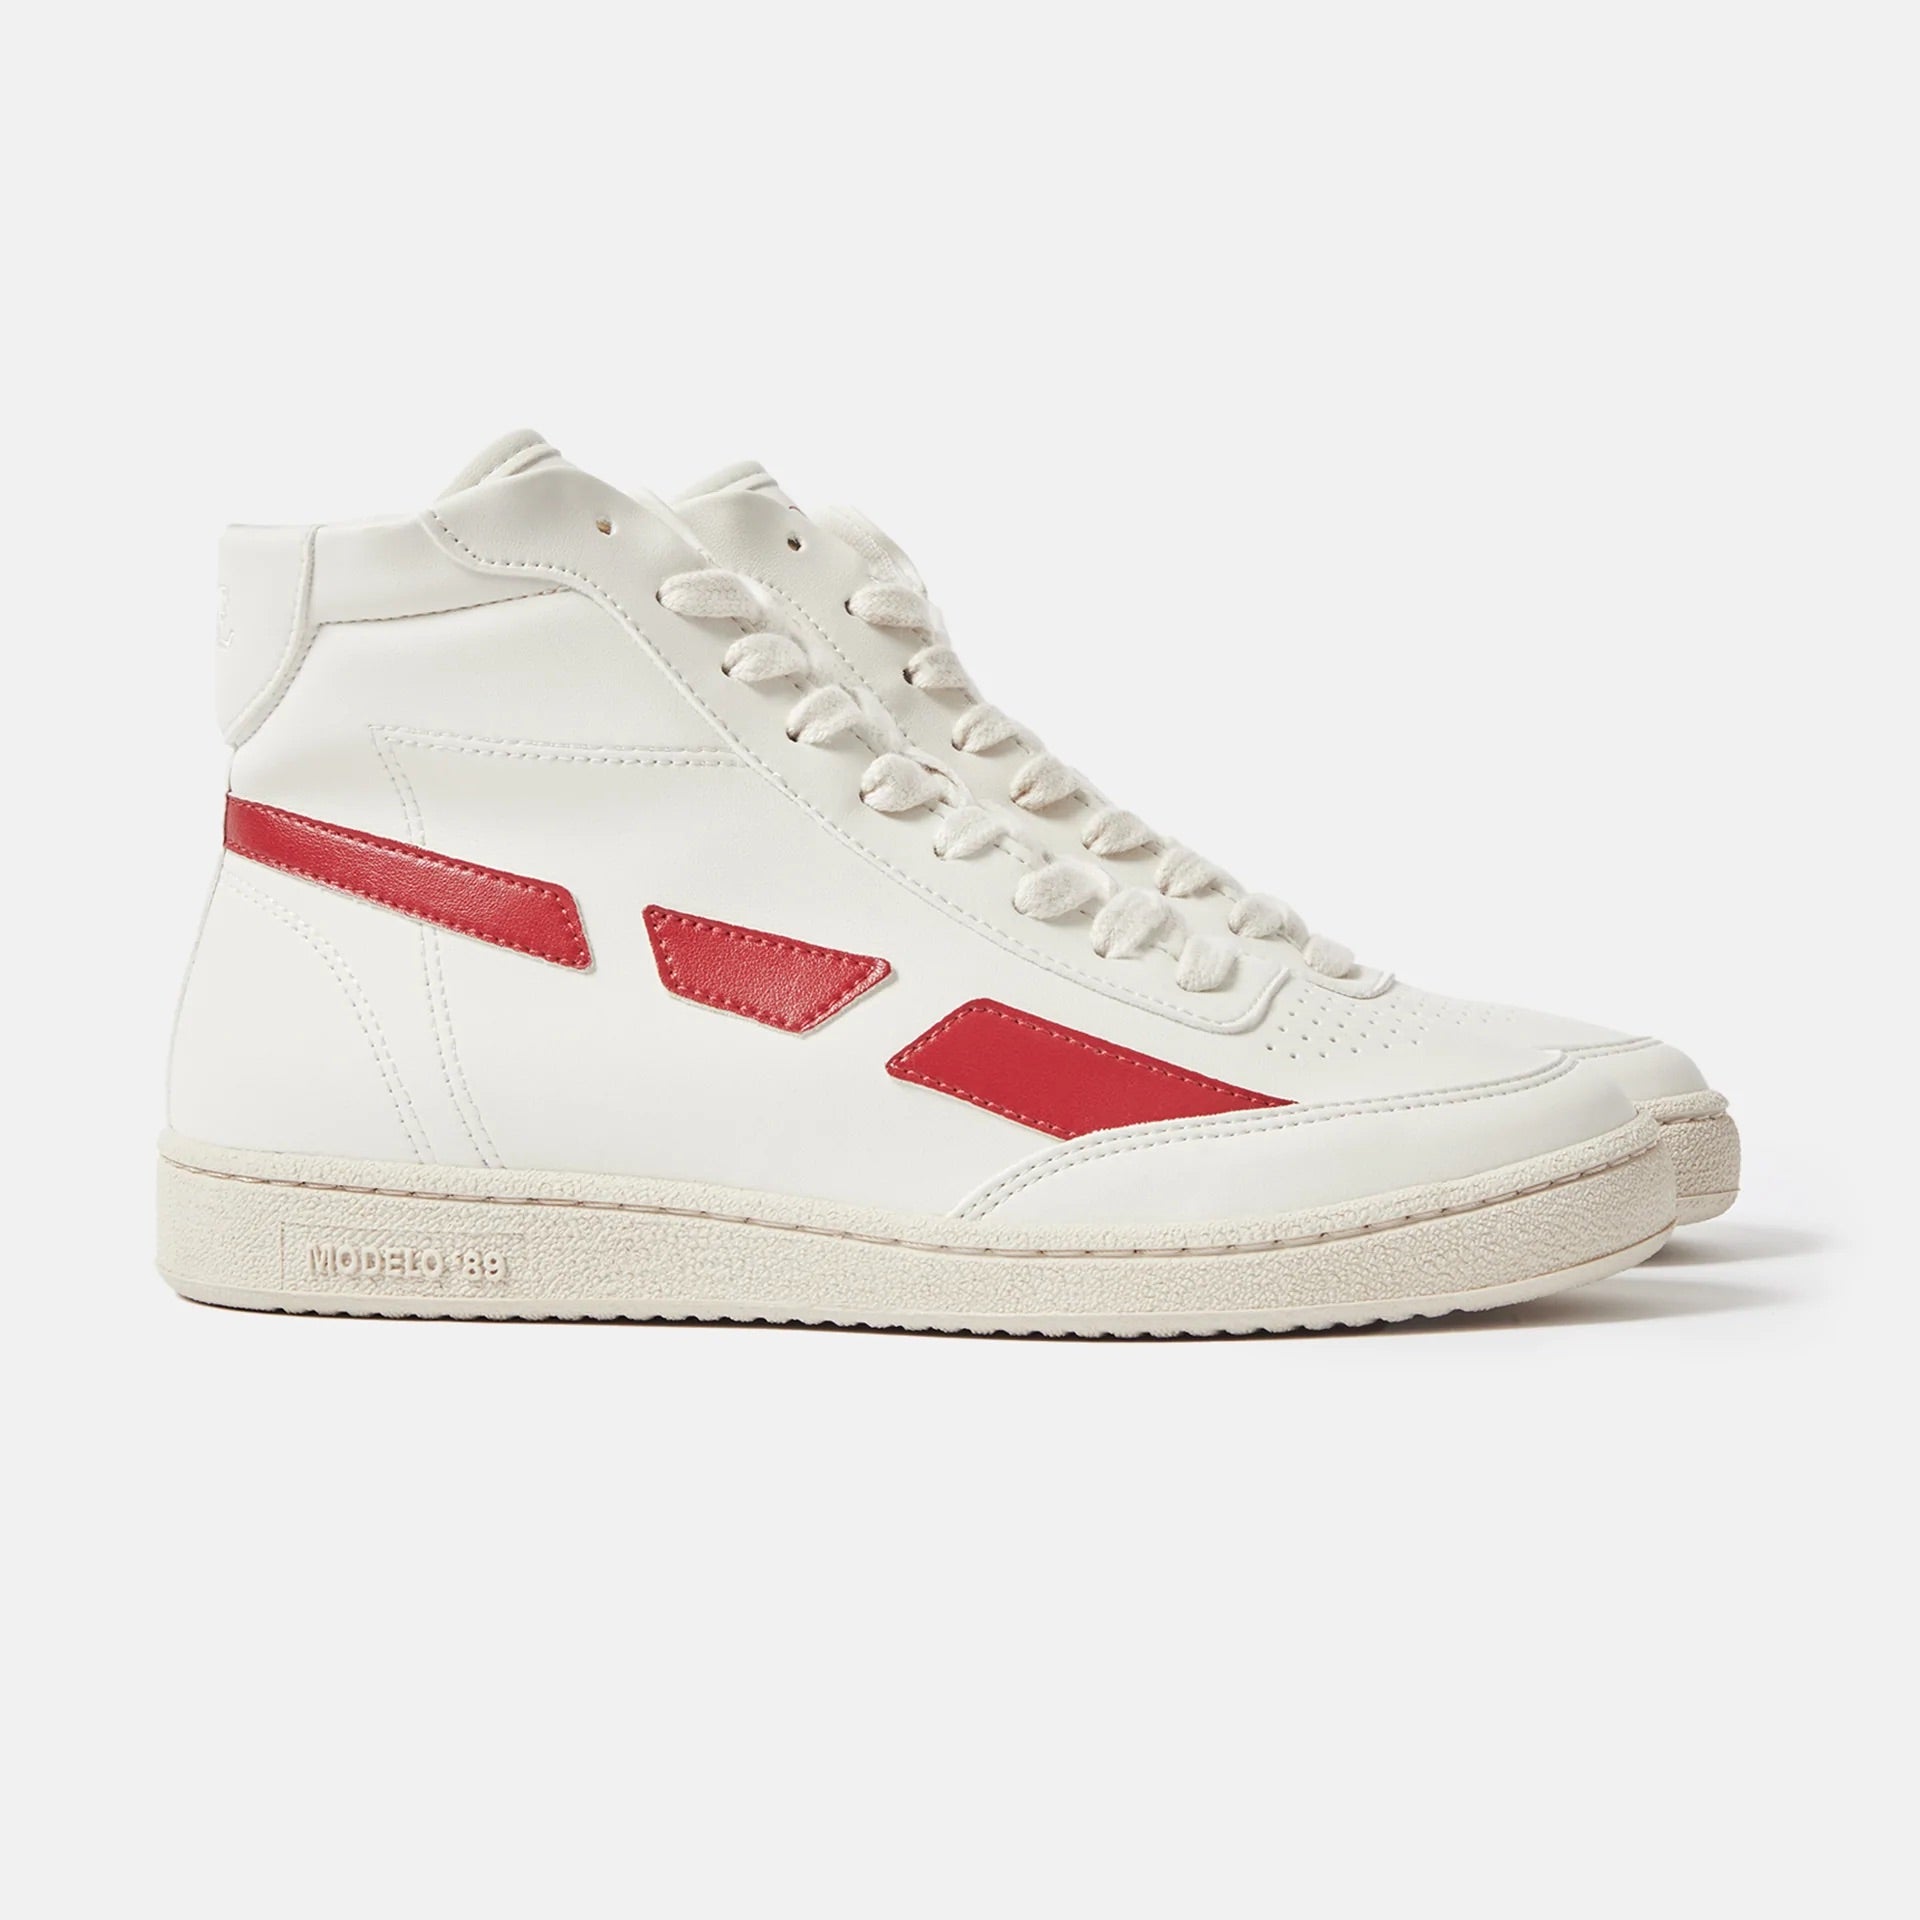 A white and red SAYE Modelo '89 Hi Sneaker made with vegan leather.